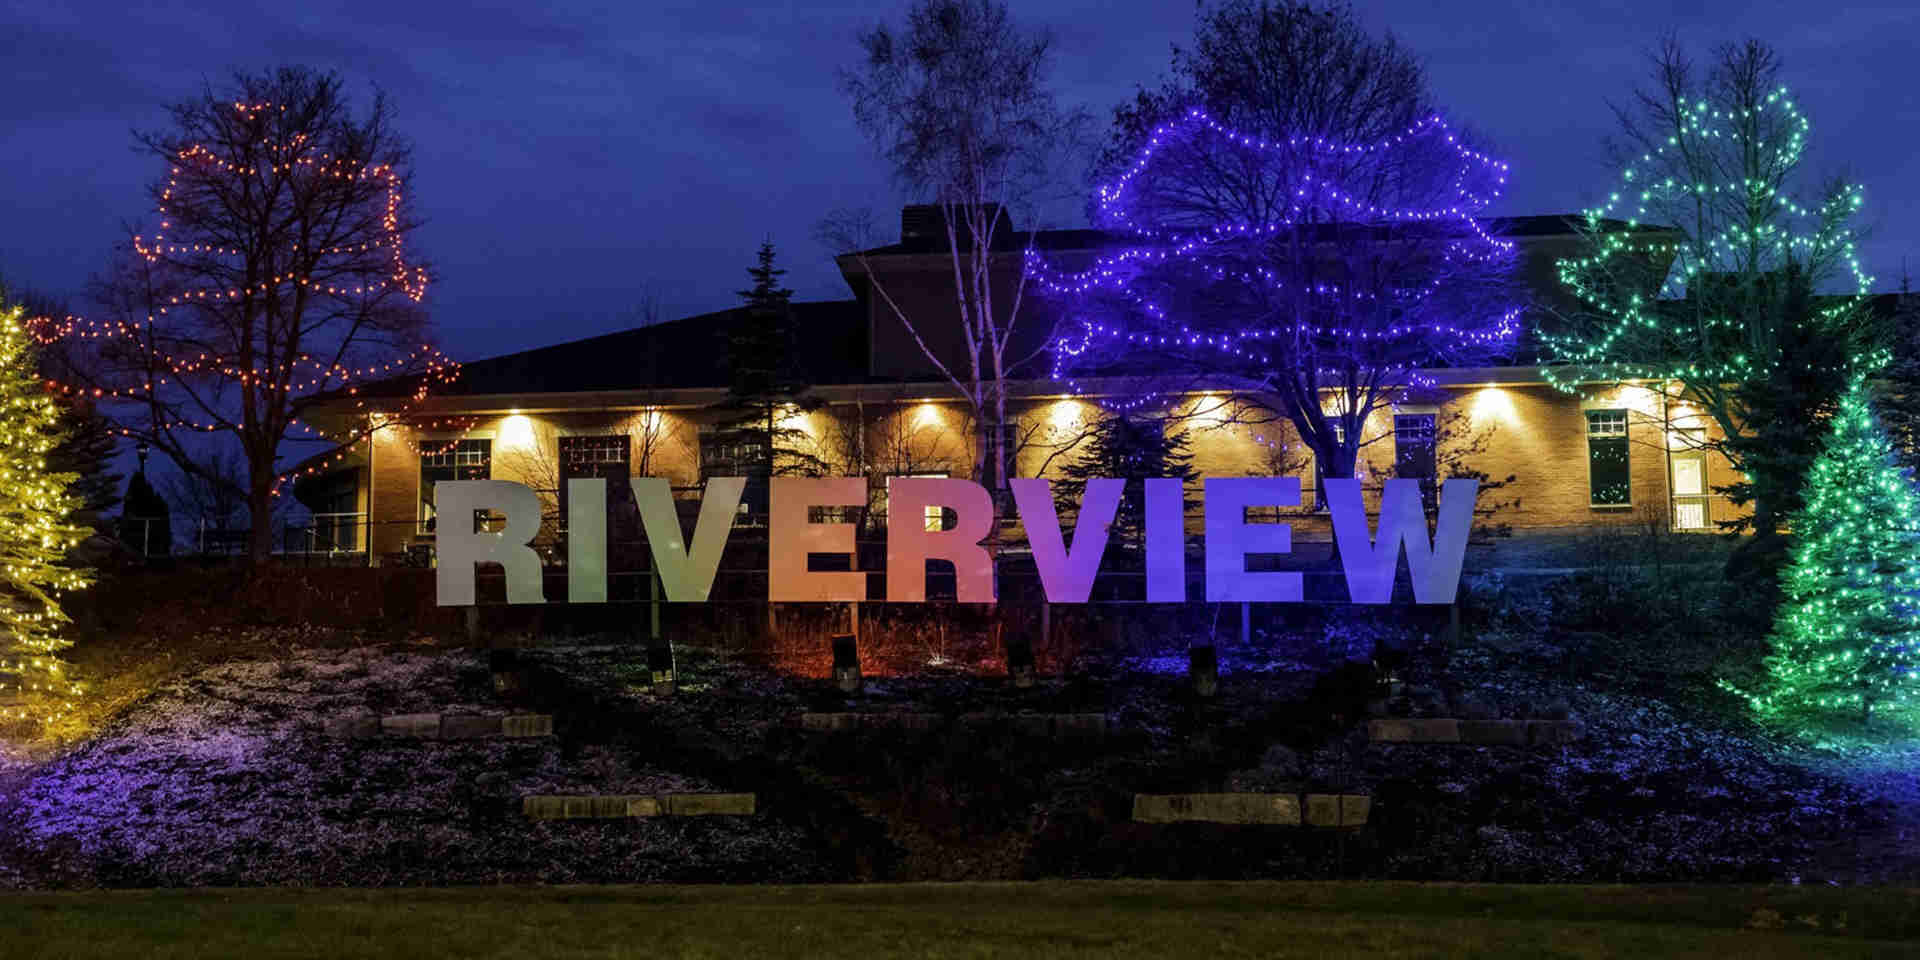 Riverview New Brunswick: A Great Place To Grow Where Adventures Await - Riverview-sign-lit-up